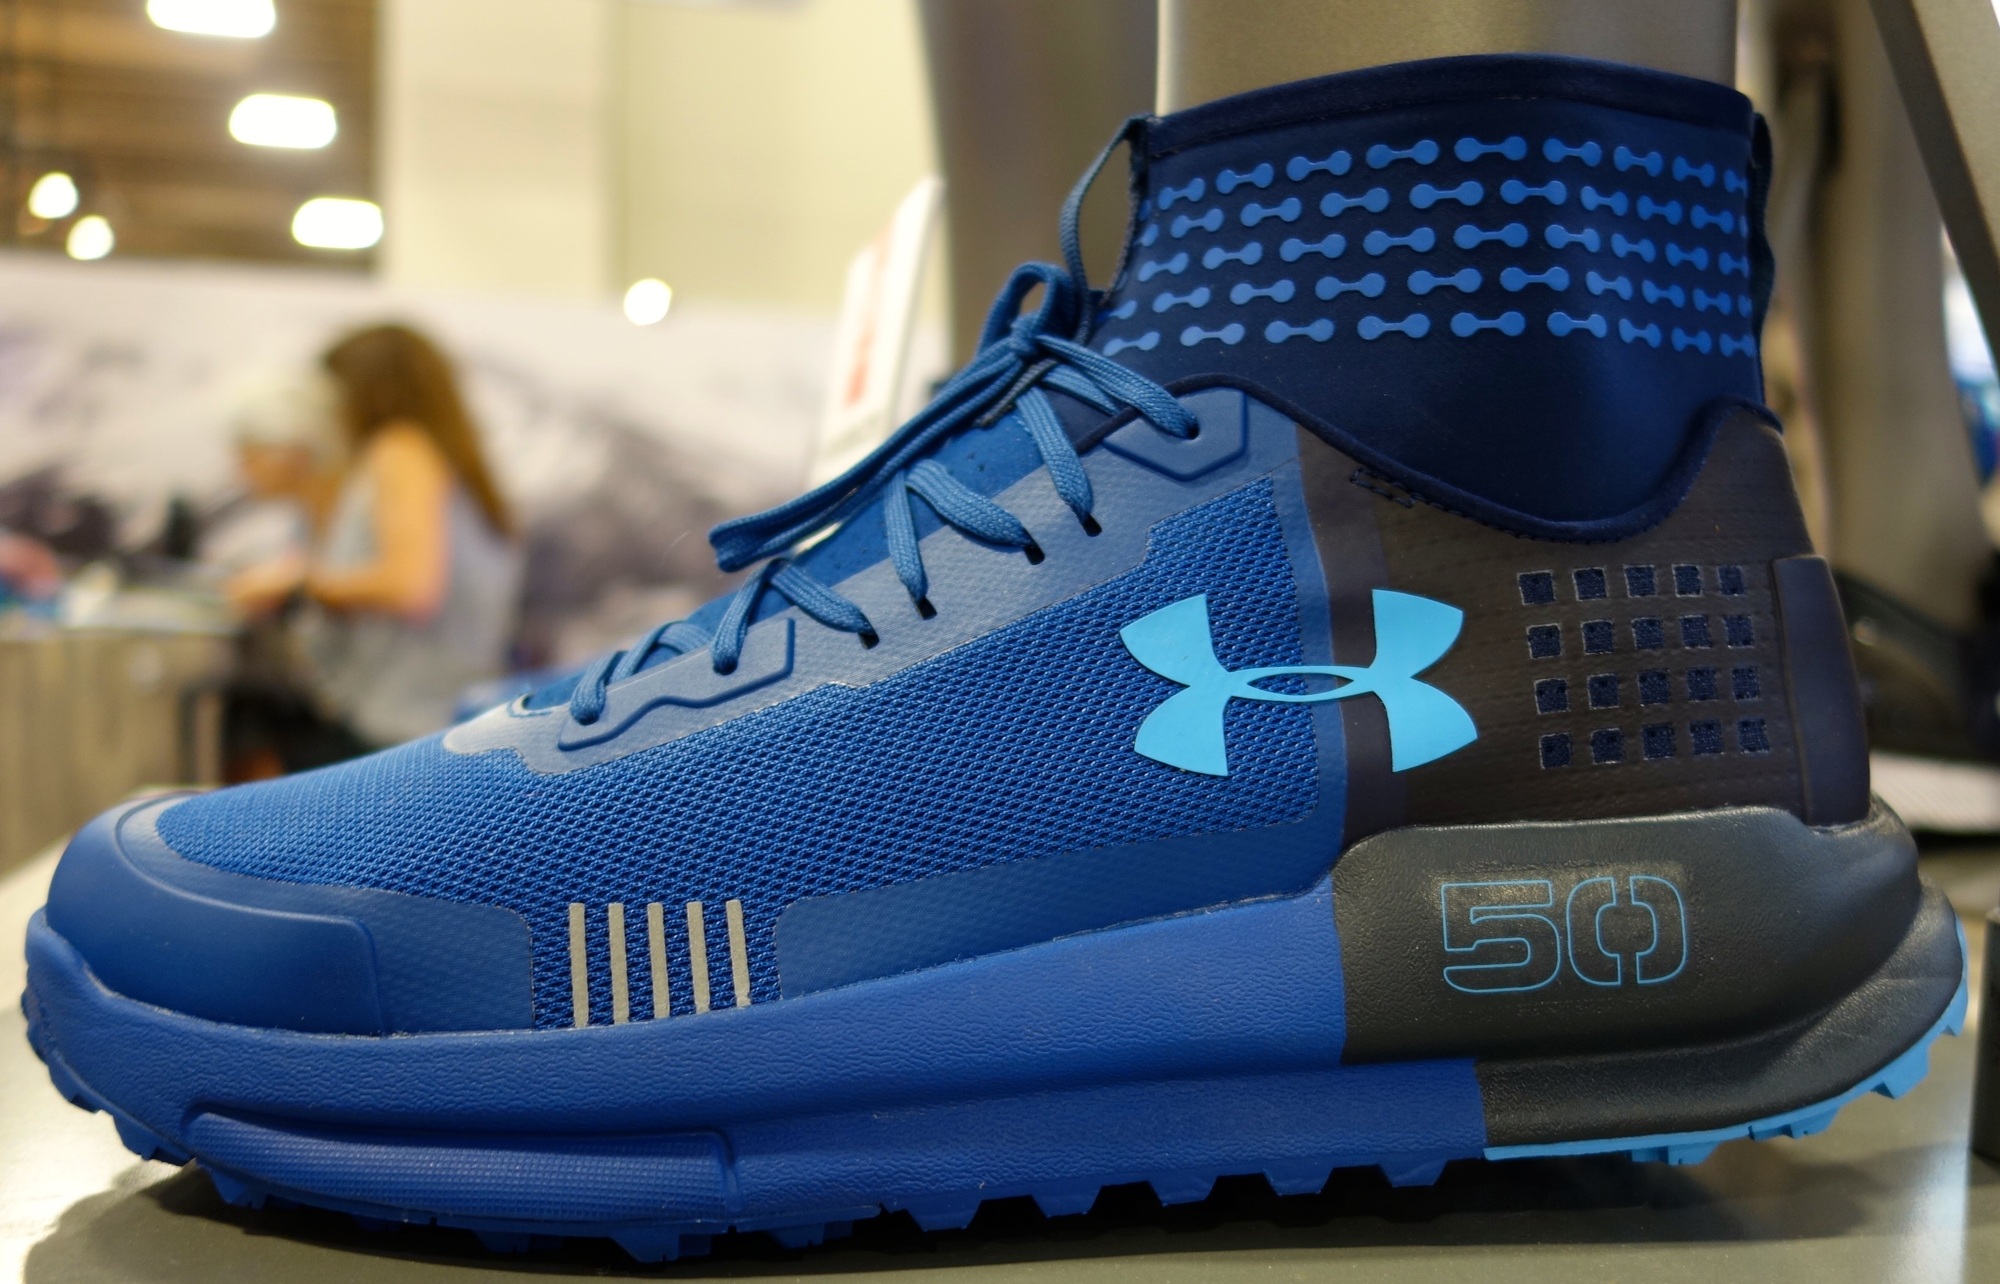 2018 under armour shoes